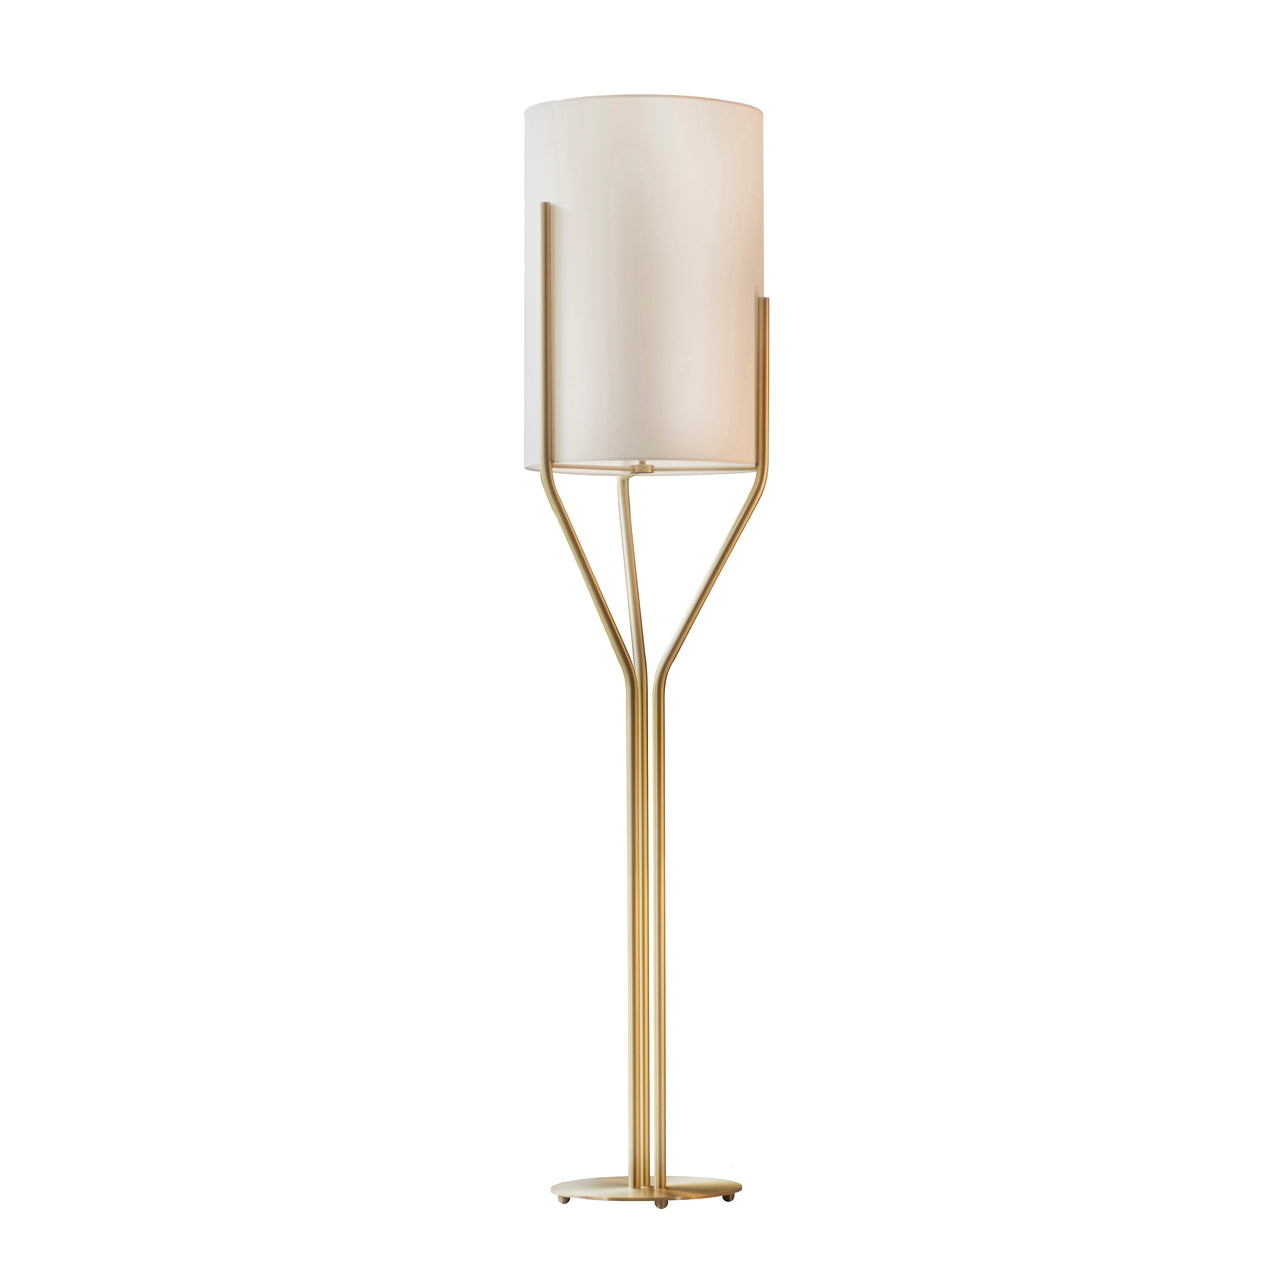 Arborescence Floor Lamp: Large + Extra Large - 70.9